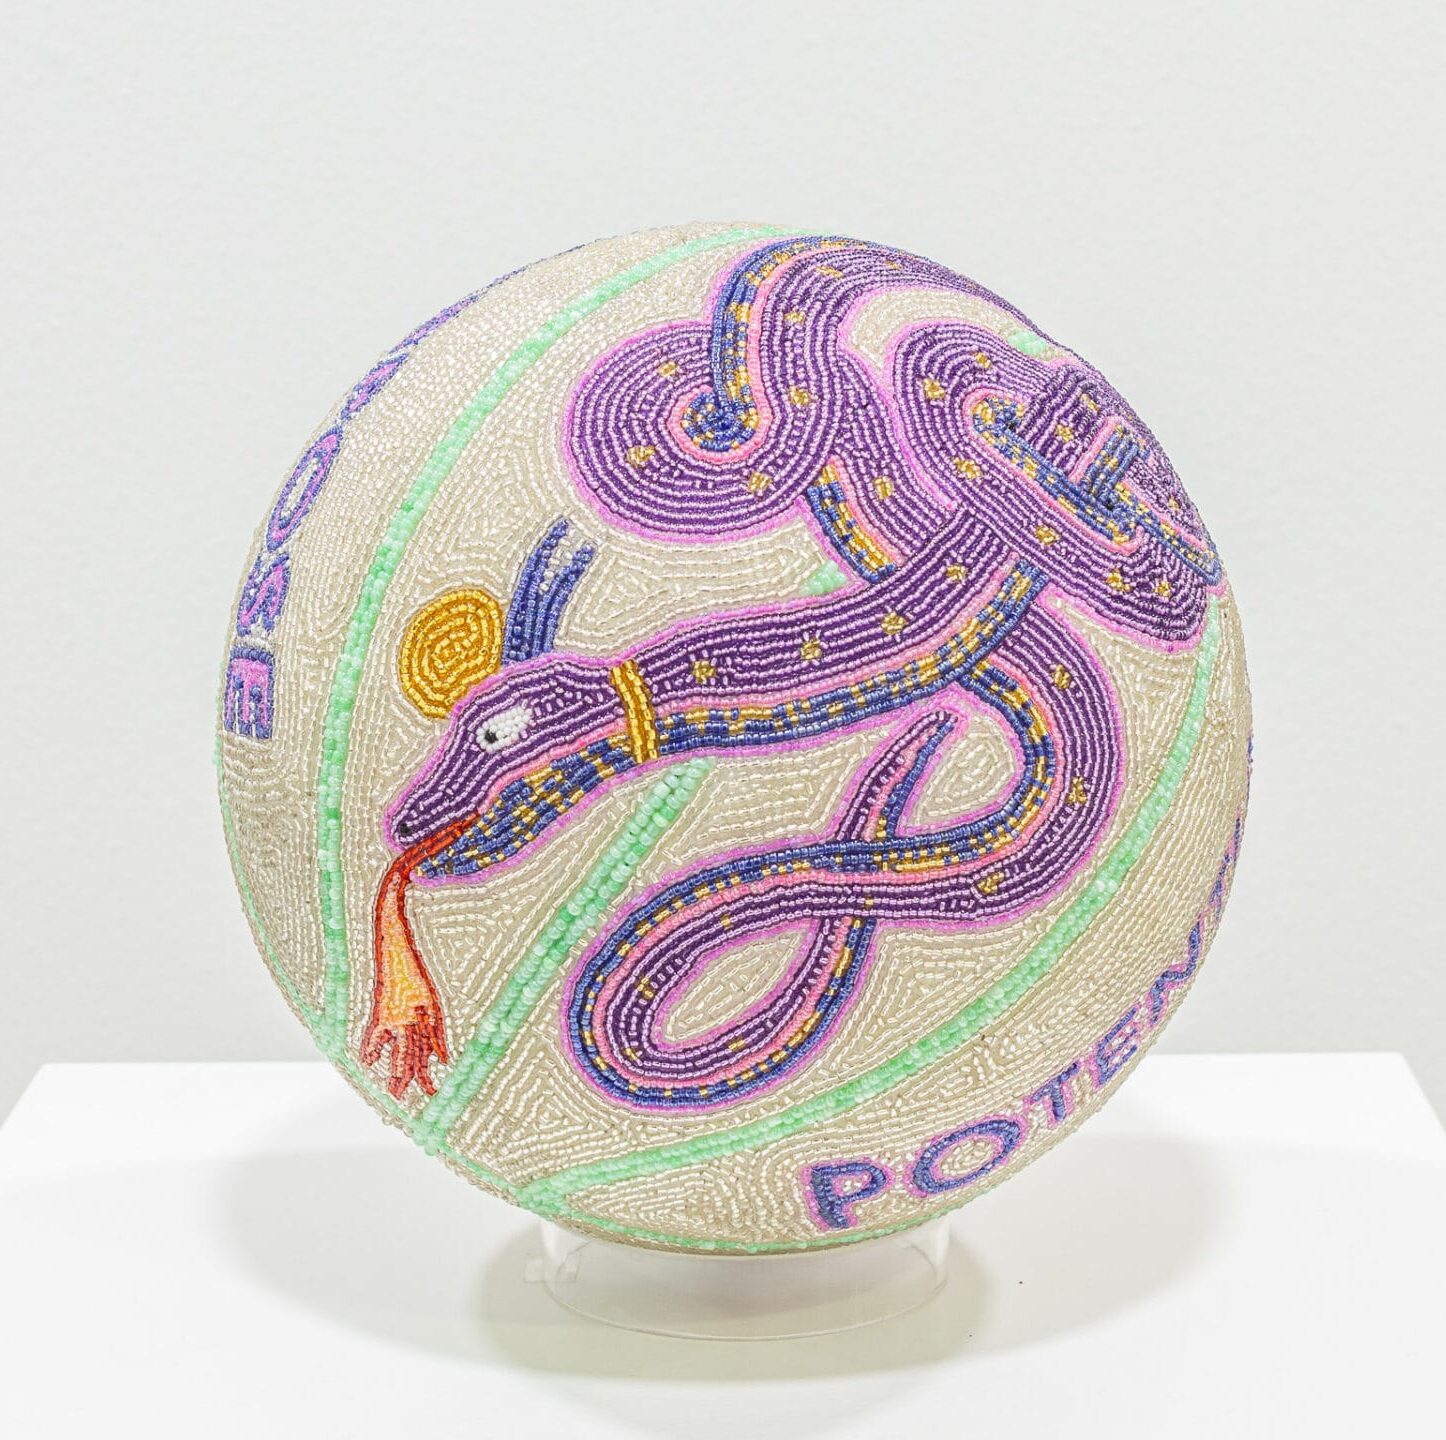 a glass bead-coated spherical sculpture made from a basketball depicting a medieval-style snake on a light green background